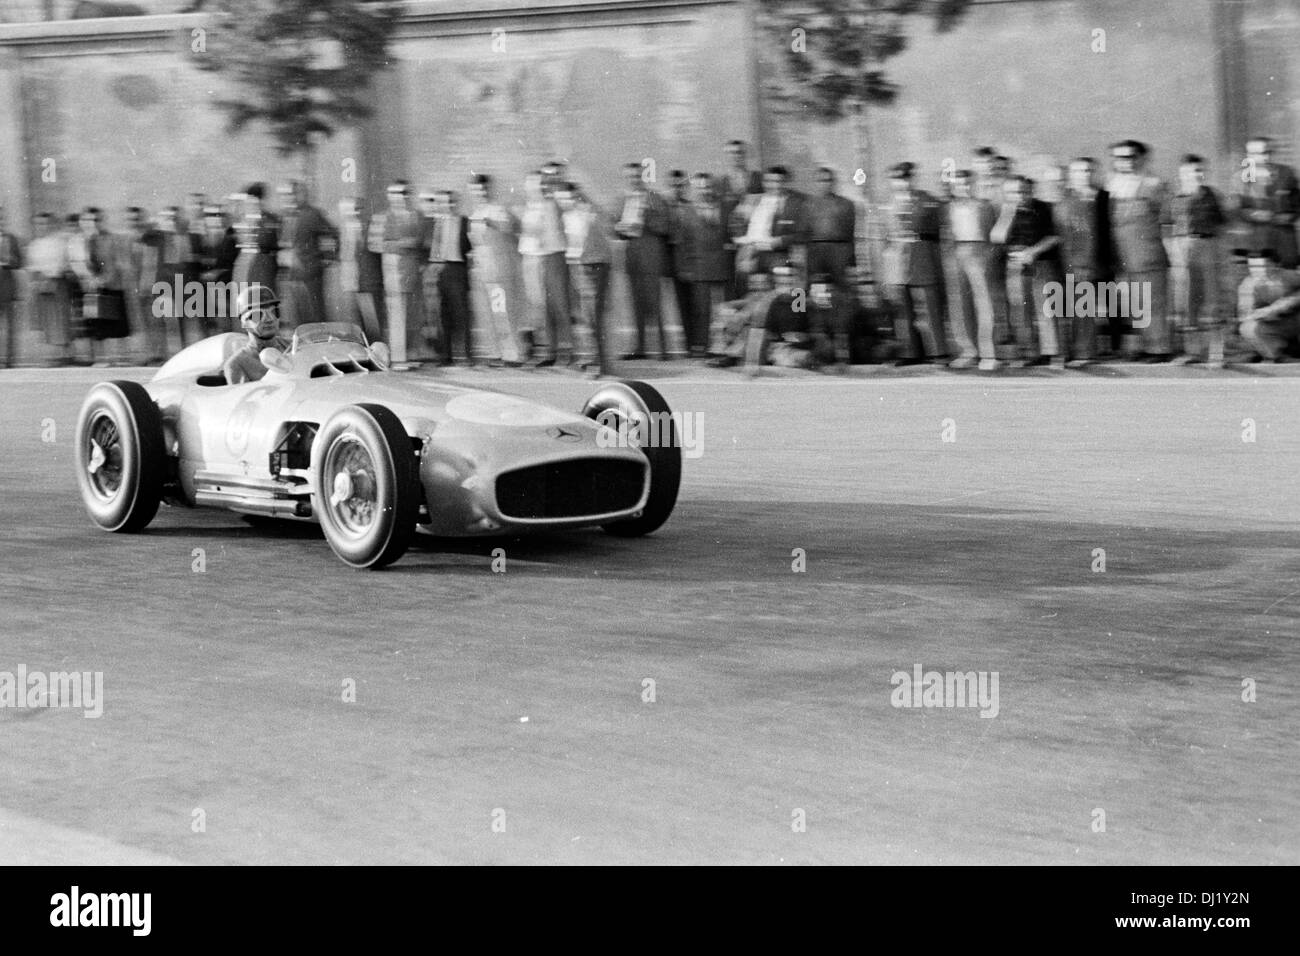 Hans Herrmann in a Mercedes-Benz W196 at the Spanish Grand Prix, Pedralbes, Spain 24 Oct 1954. Stock Photo